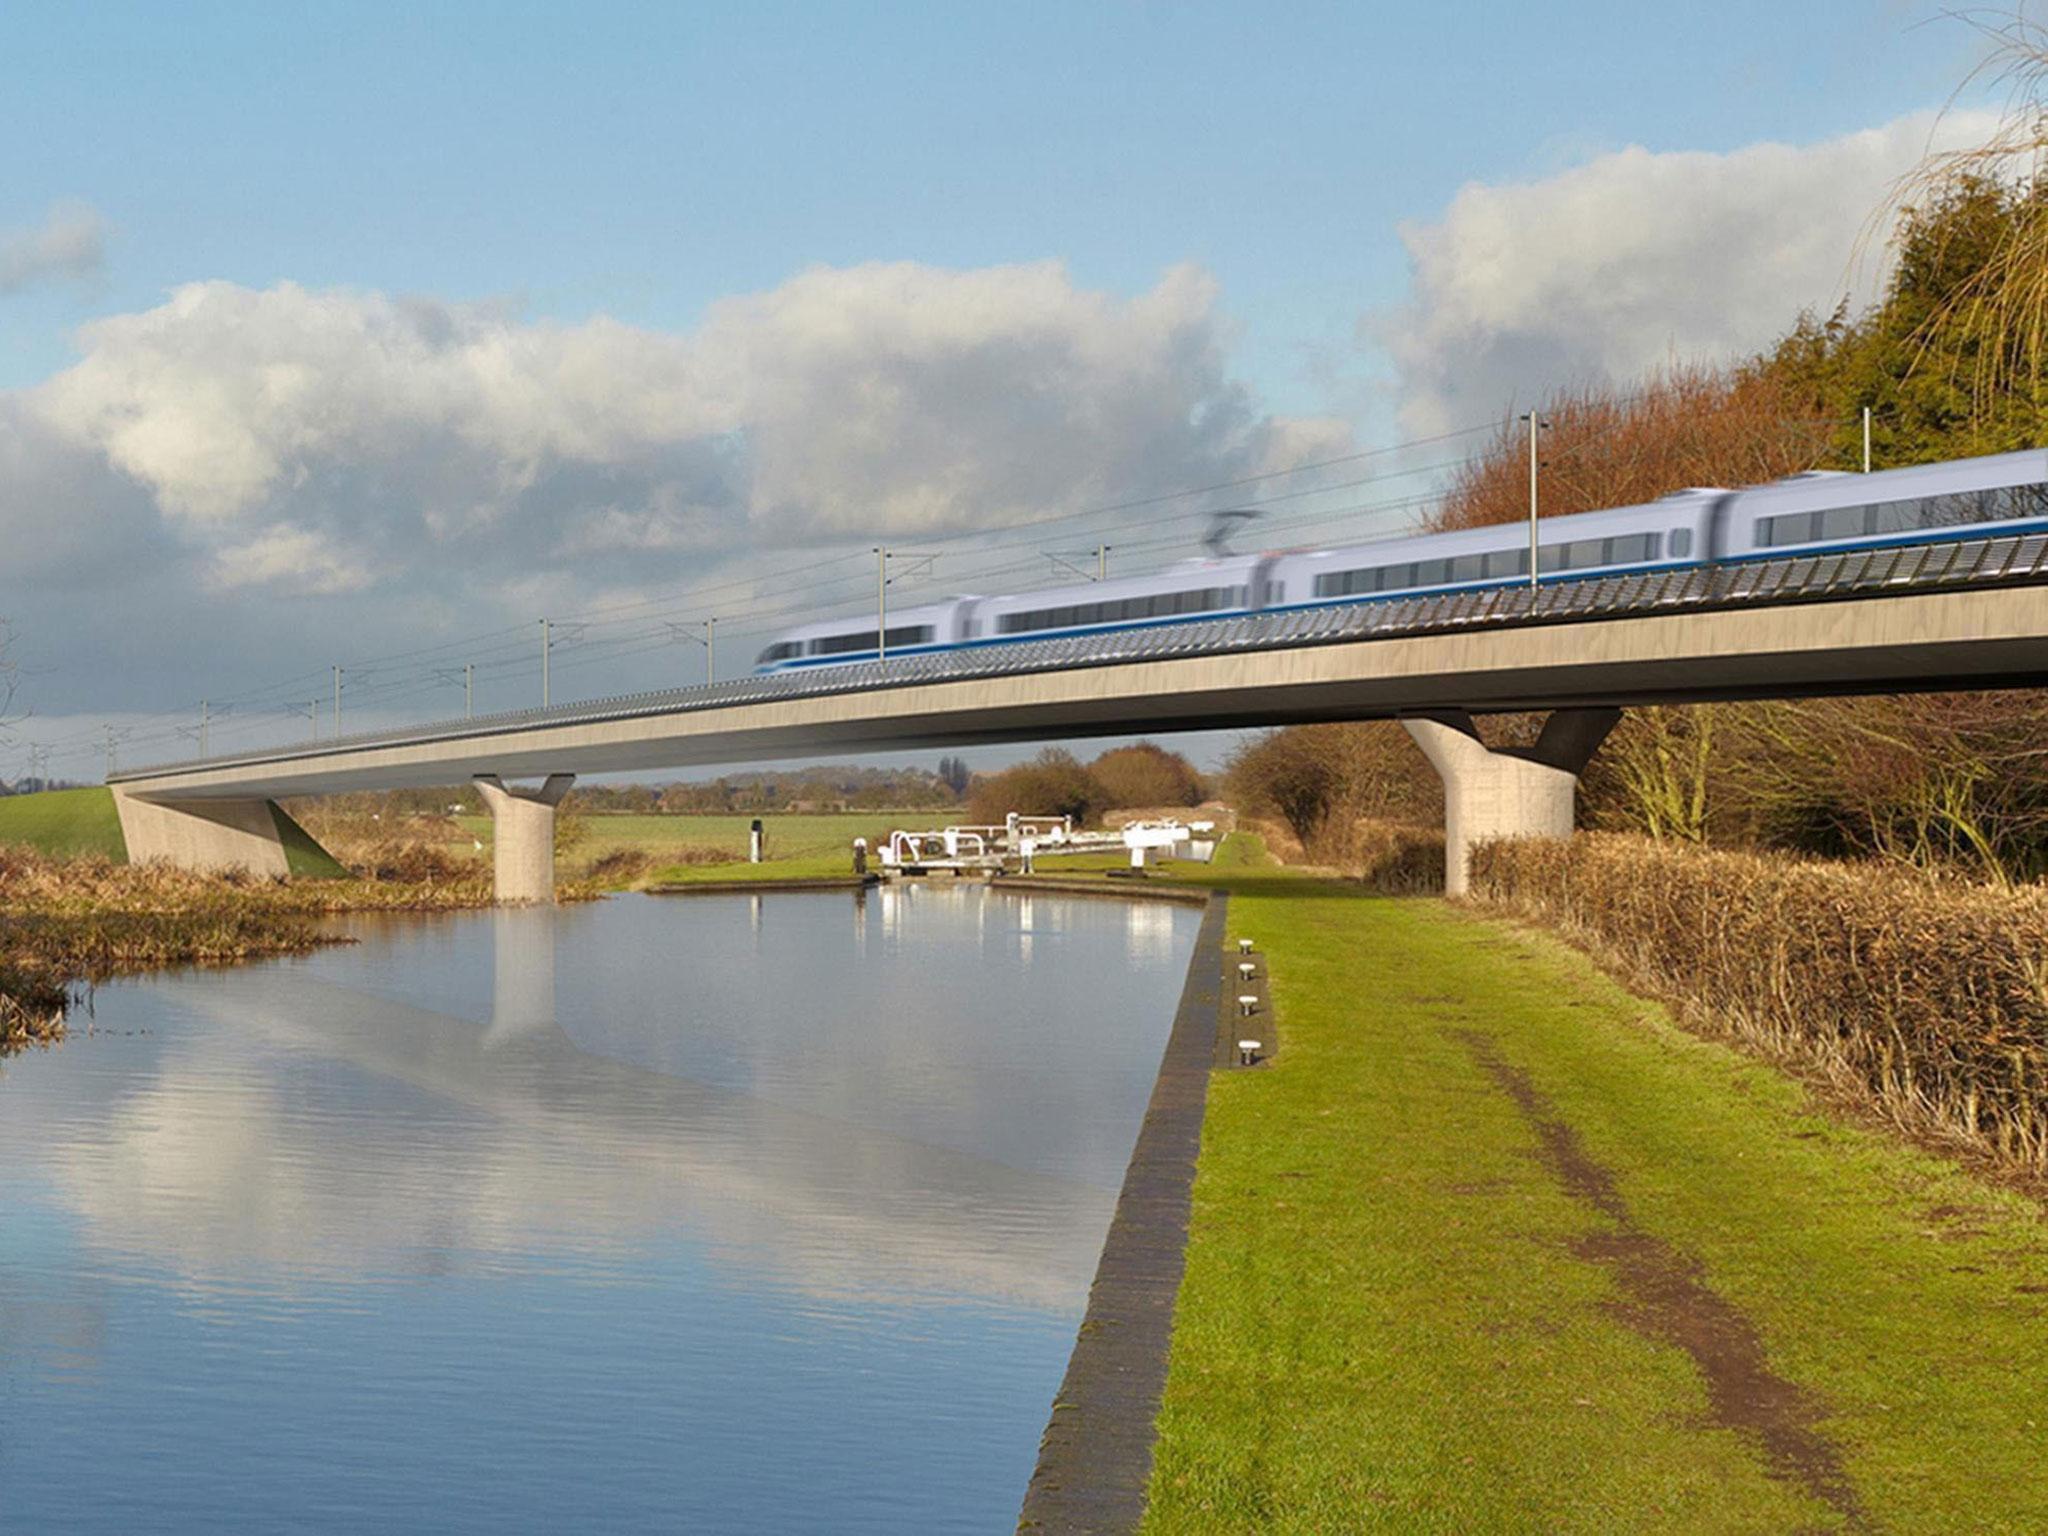 Part of the proposed route for the HS2 high speed rail scheme includes the Birmingham and Fazeley viaduct